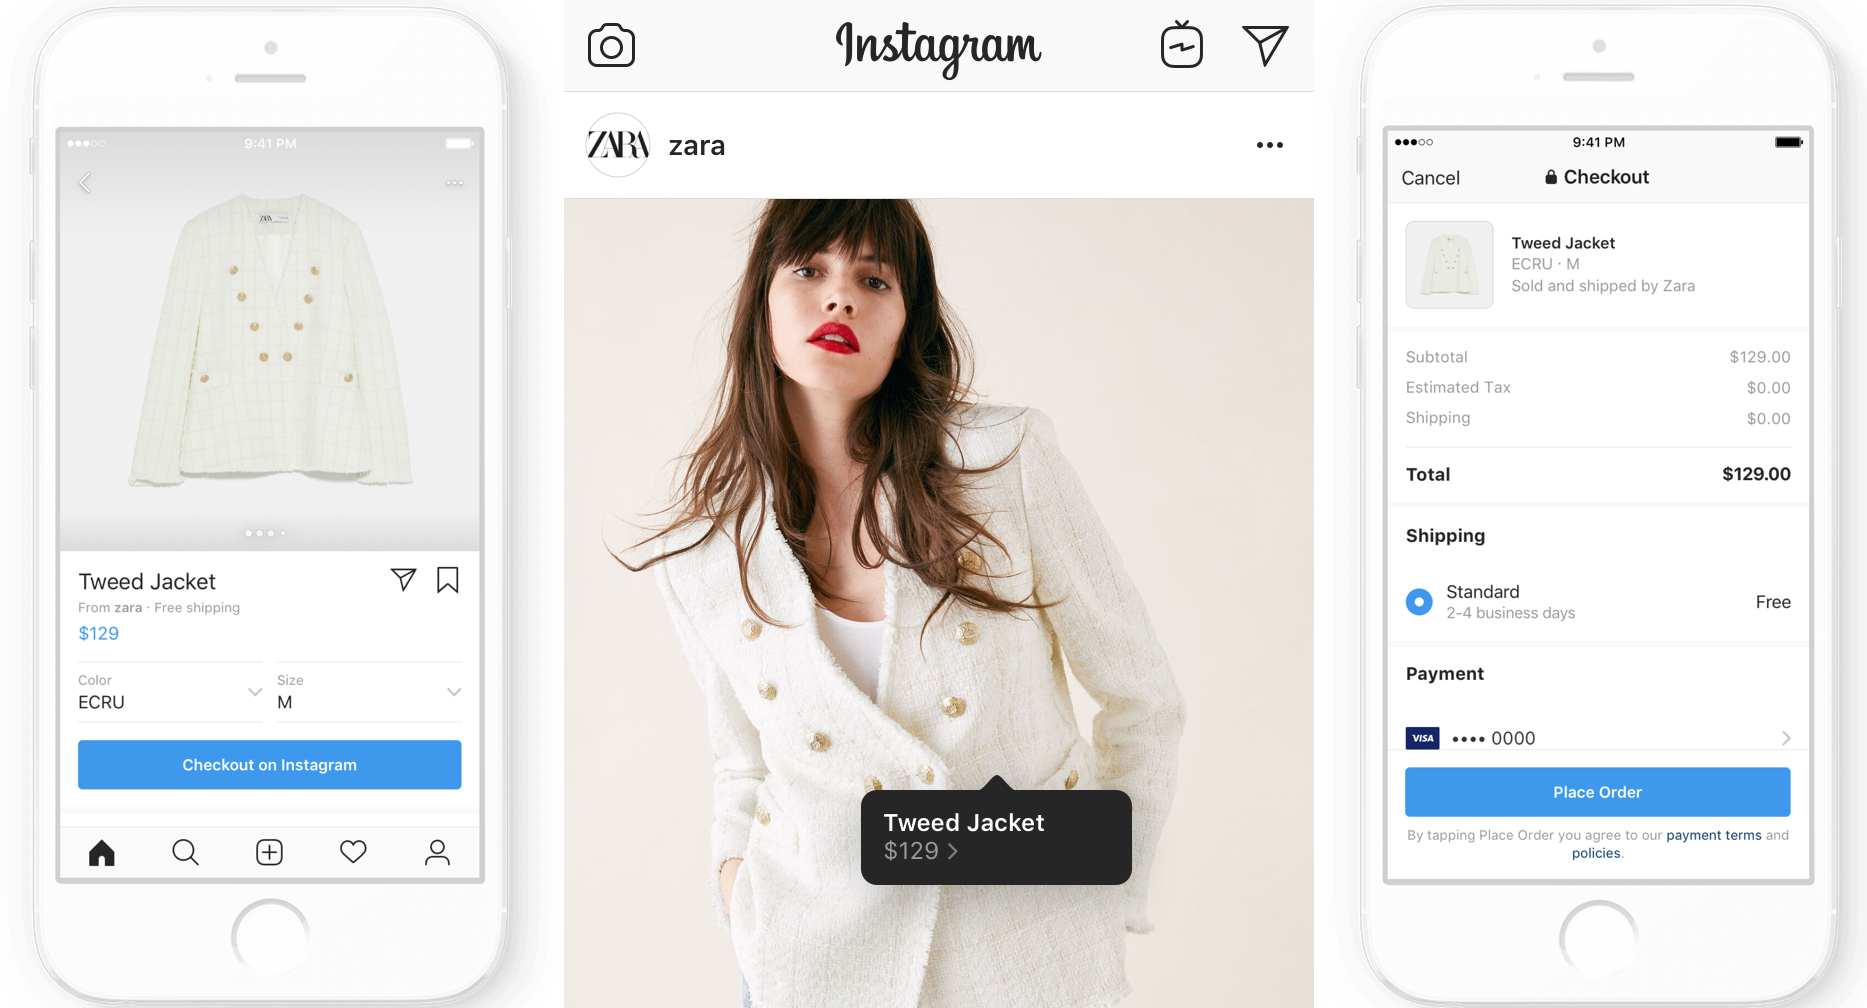 Example screenshots of Instagram Product Tagging